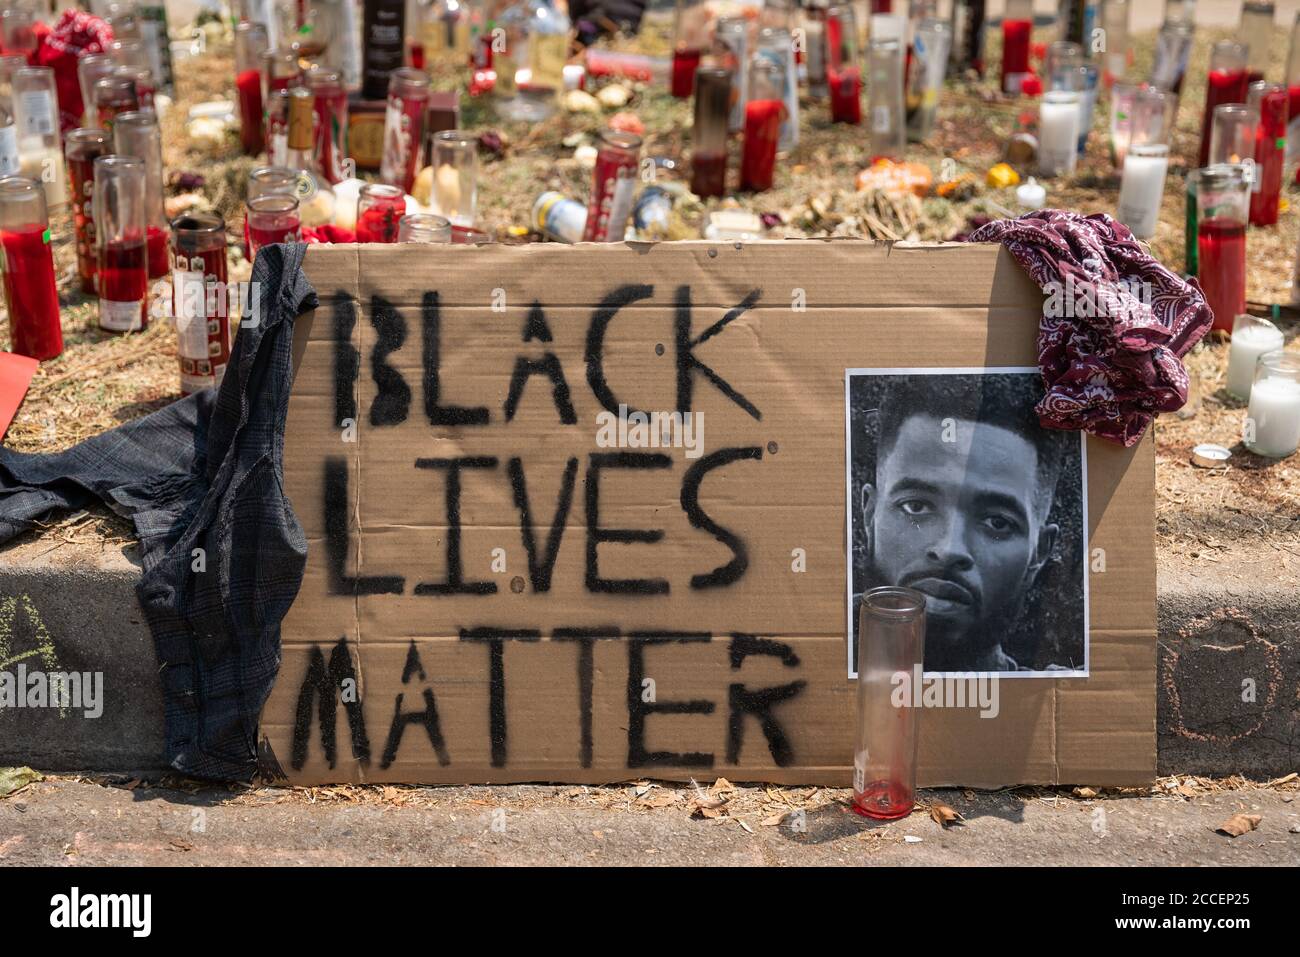 Pasadena, California, USA. 21st August, 2020. Roadside memorial dedicated to Anthony McClain, near location on N. Raymond Ave. where he was killed by a Pasadena police officer on August 15th, 2020. Credit: Jim Newberry/Alamy Live News Stock Photo